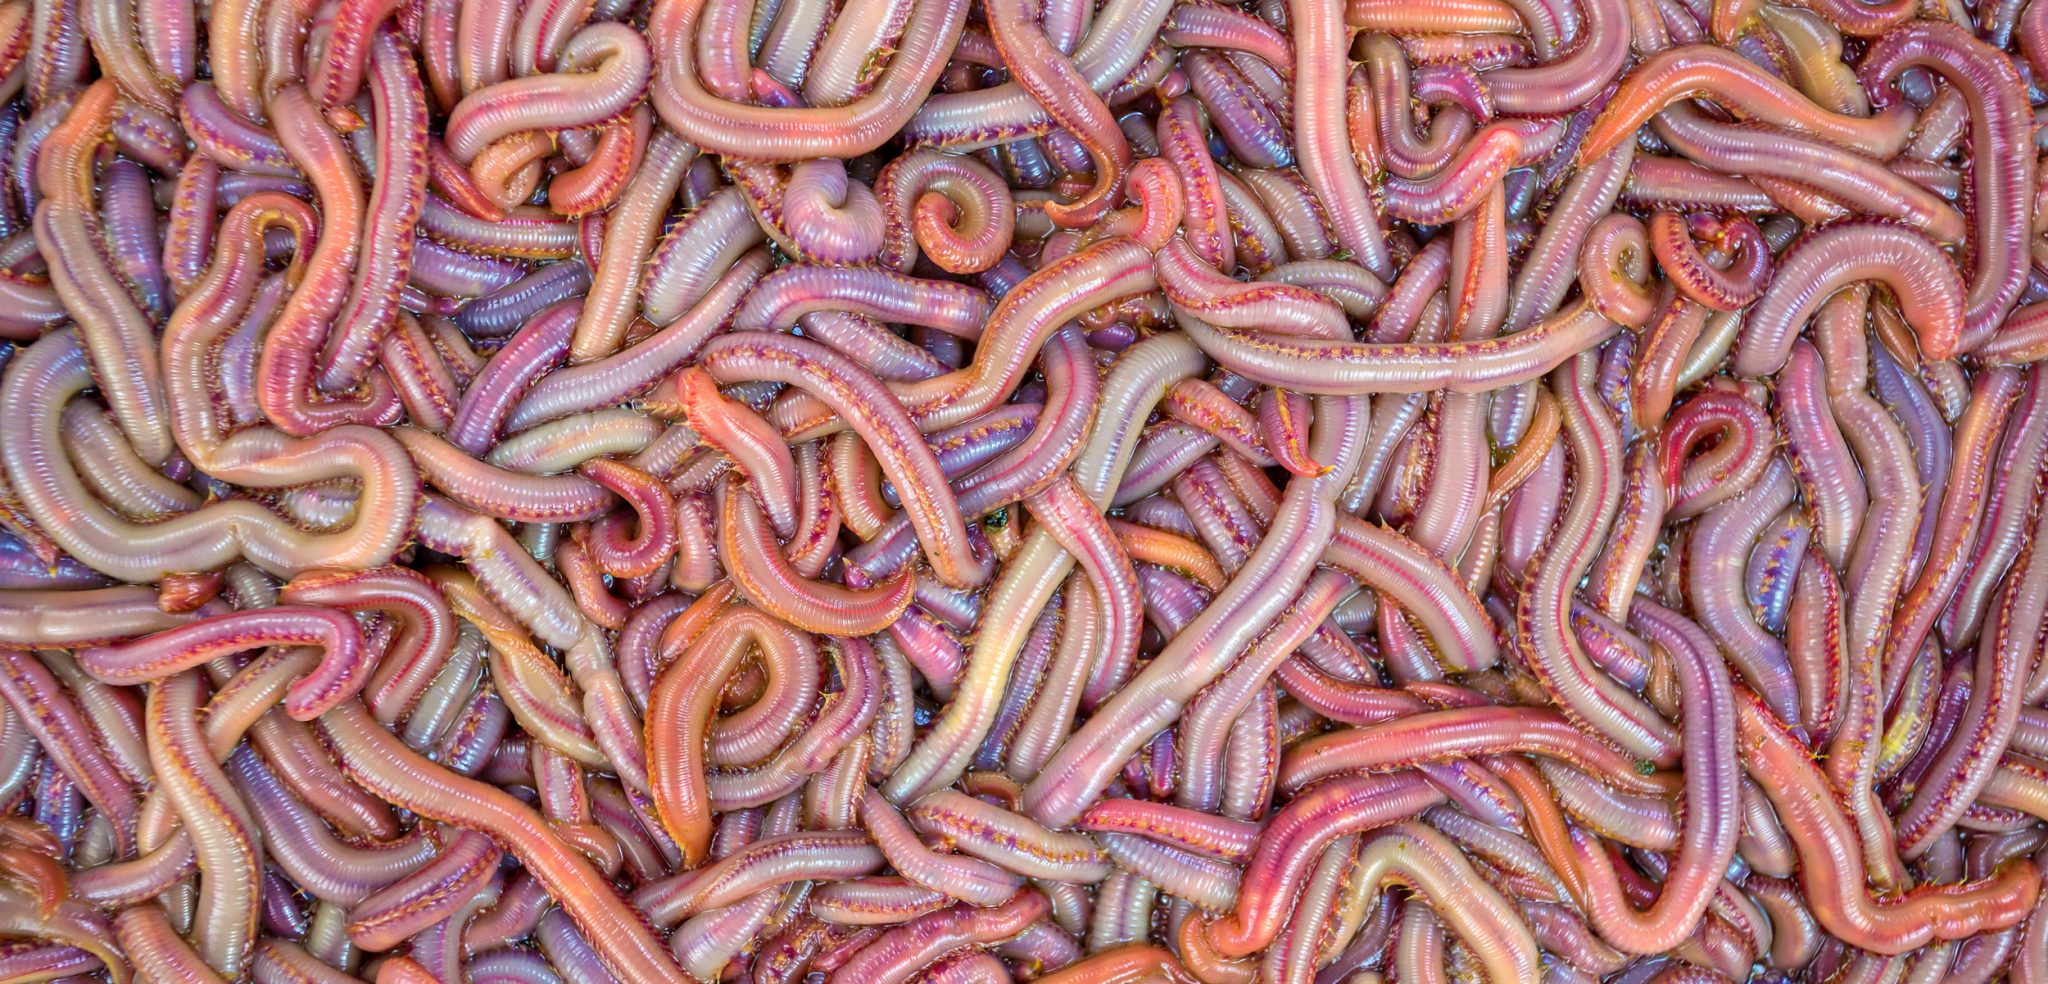 download bloodworms for betta fish